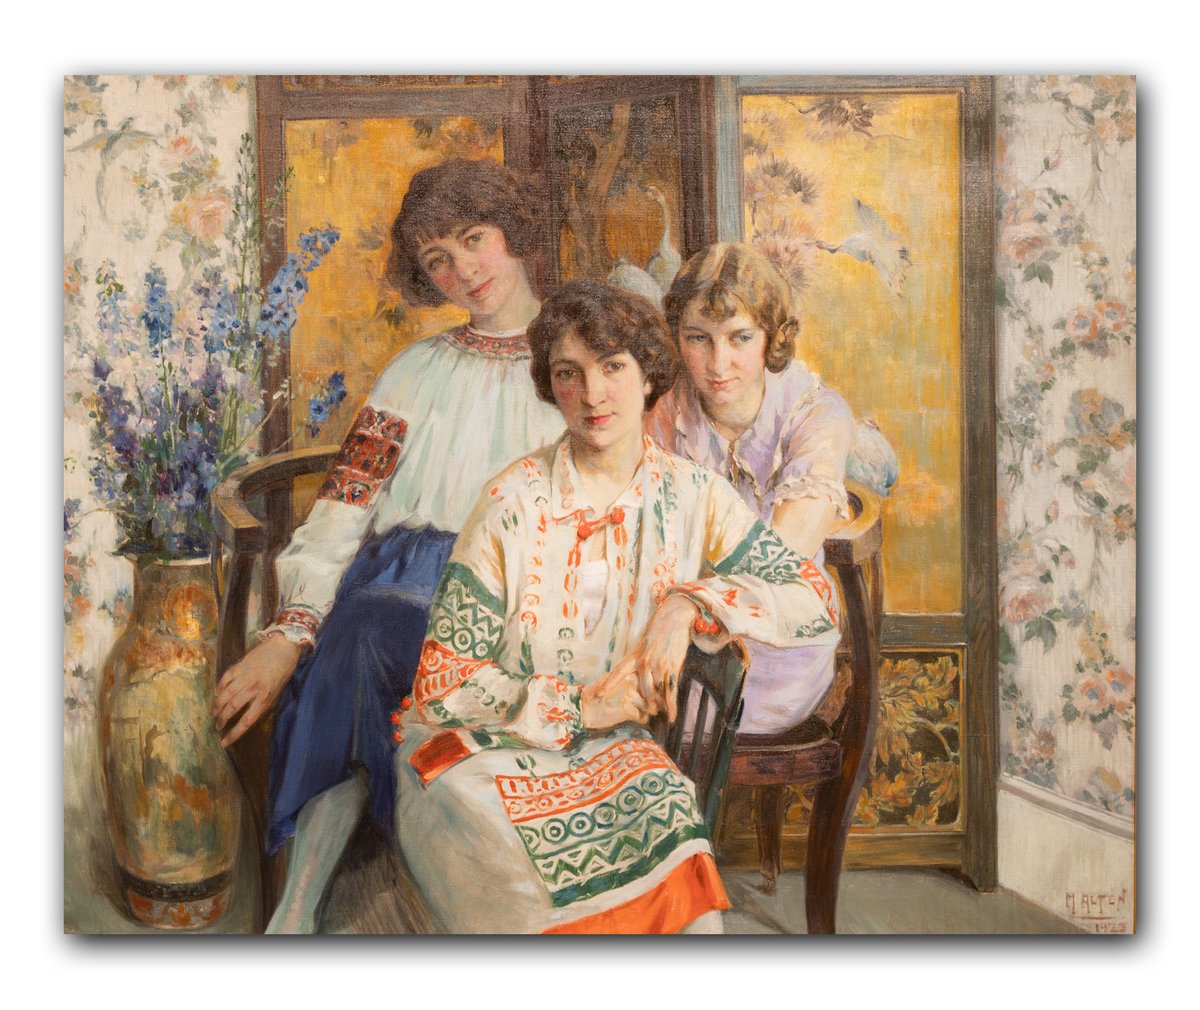 I'm late in posting. It's been a busy morning. Art Inspiration For Today: The Alten Daughters by Mathias J. Alten (German-American) oil on canvas, genre: Portraiture Impressionism, 1925 #thealtendaughters #mathiasjalten #artinspiraton #figurativeart #artonx #pohoartist